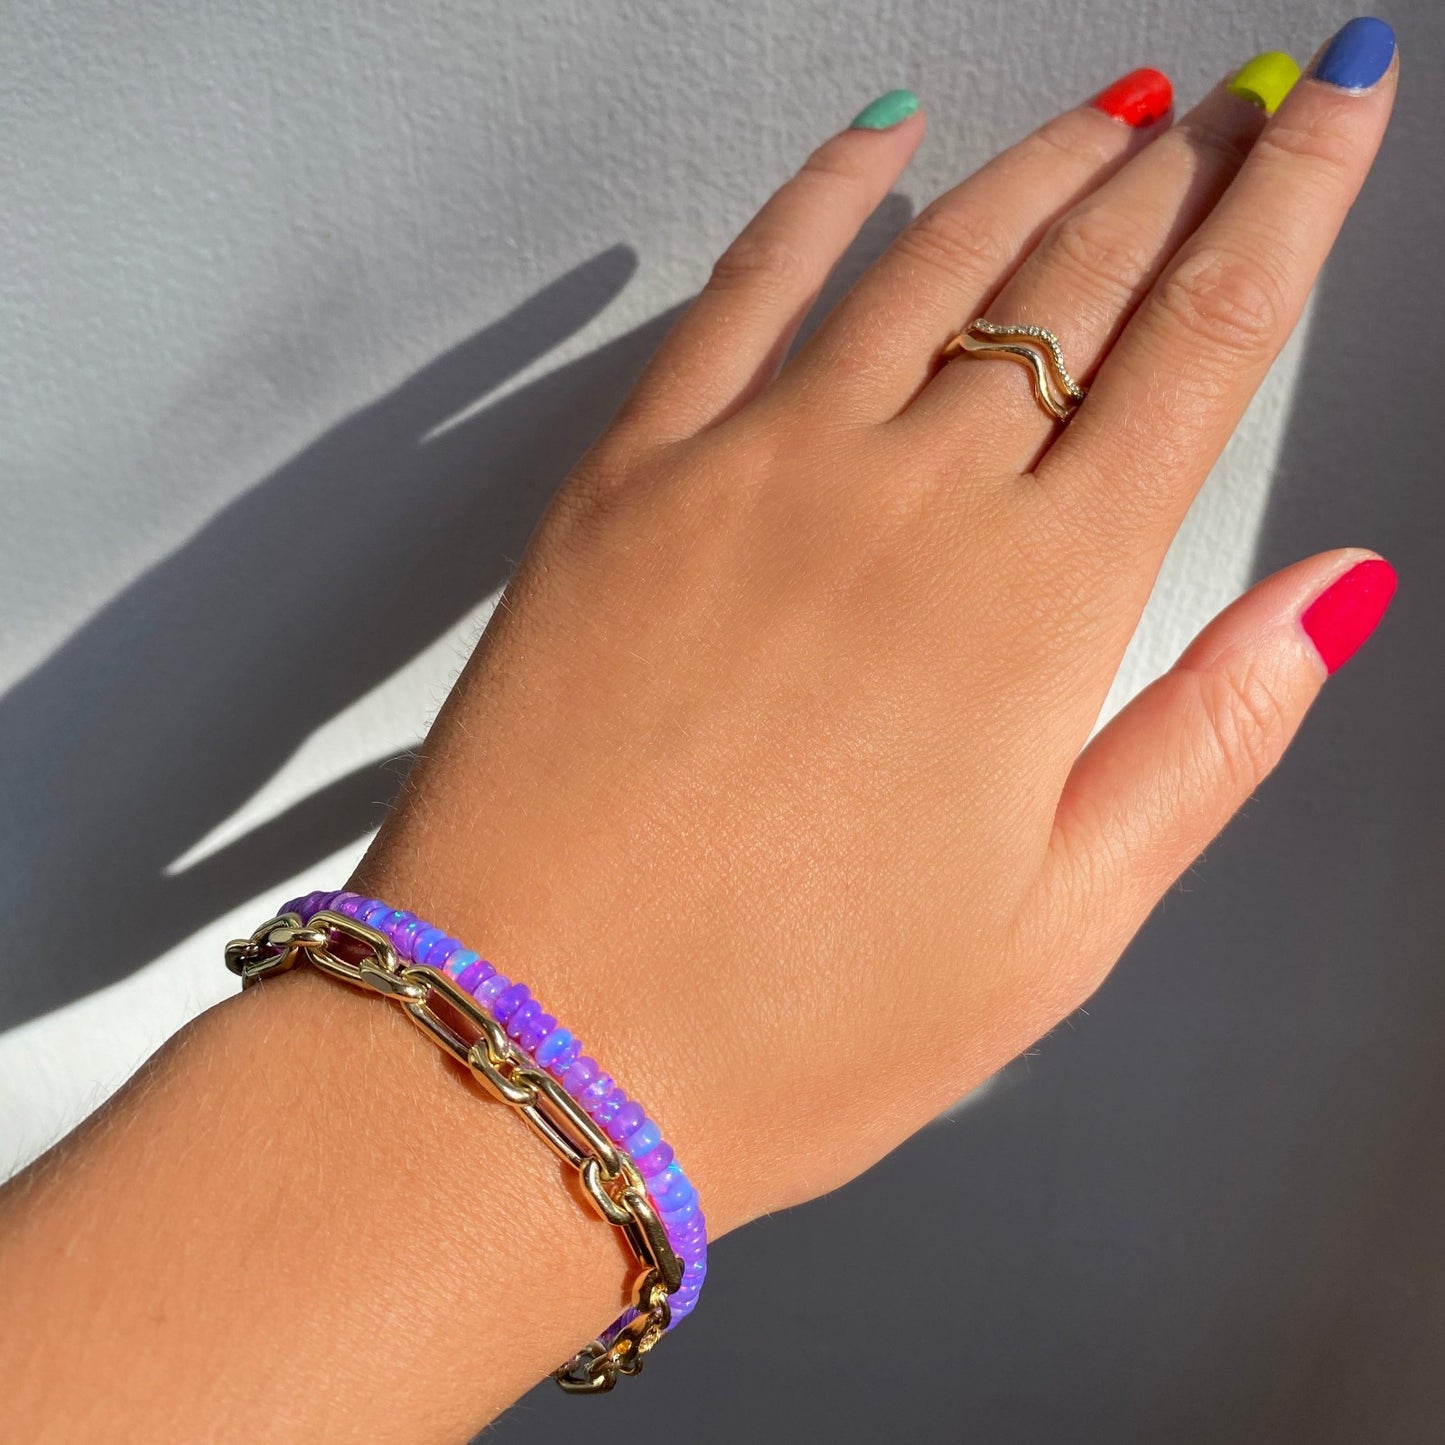 Shimmering beaded bracelet made of smooth opals in shades of bright purple on a gold linking lobster clasp. Styled on a wrist with a diamond cut link chain bracelet.